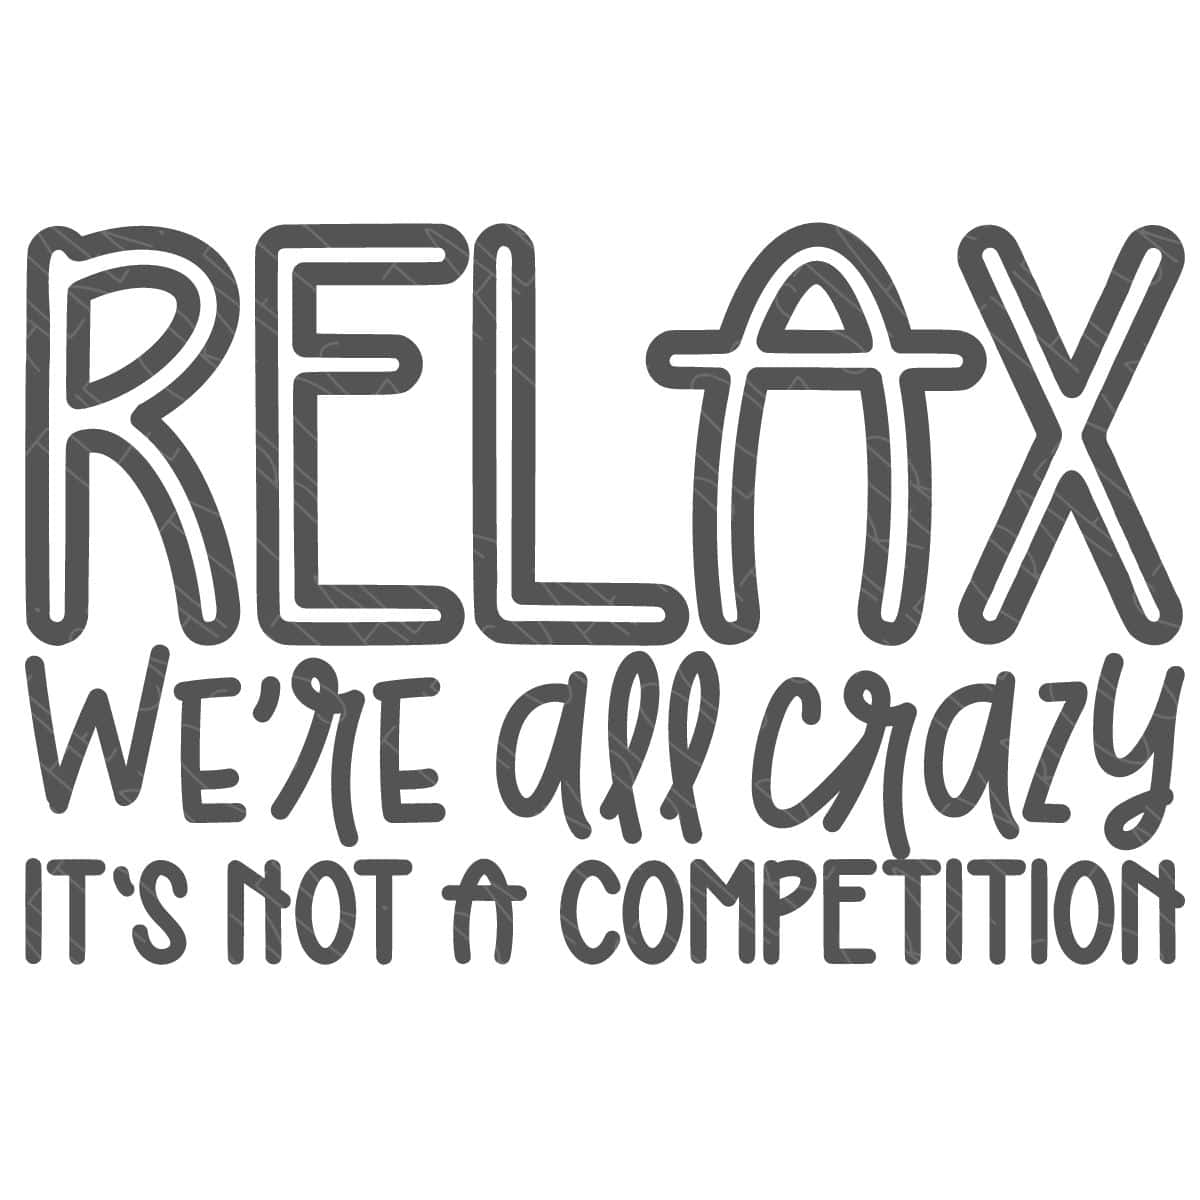 Relax We're All Crazy SVG	

			
		
	

		
			$2.50 – Buy Now Checkout
							
					
						
							
						
						Added to cart